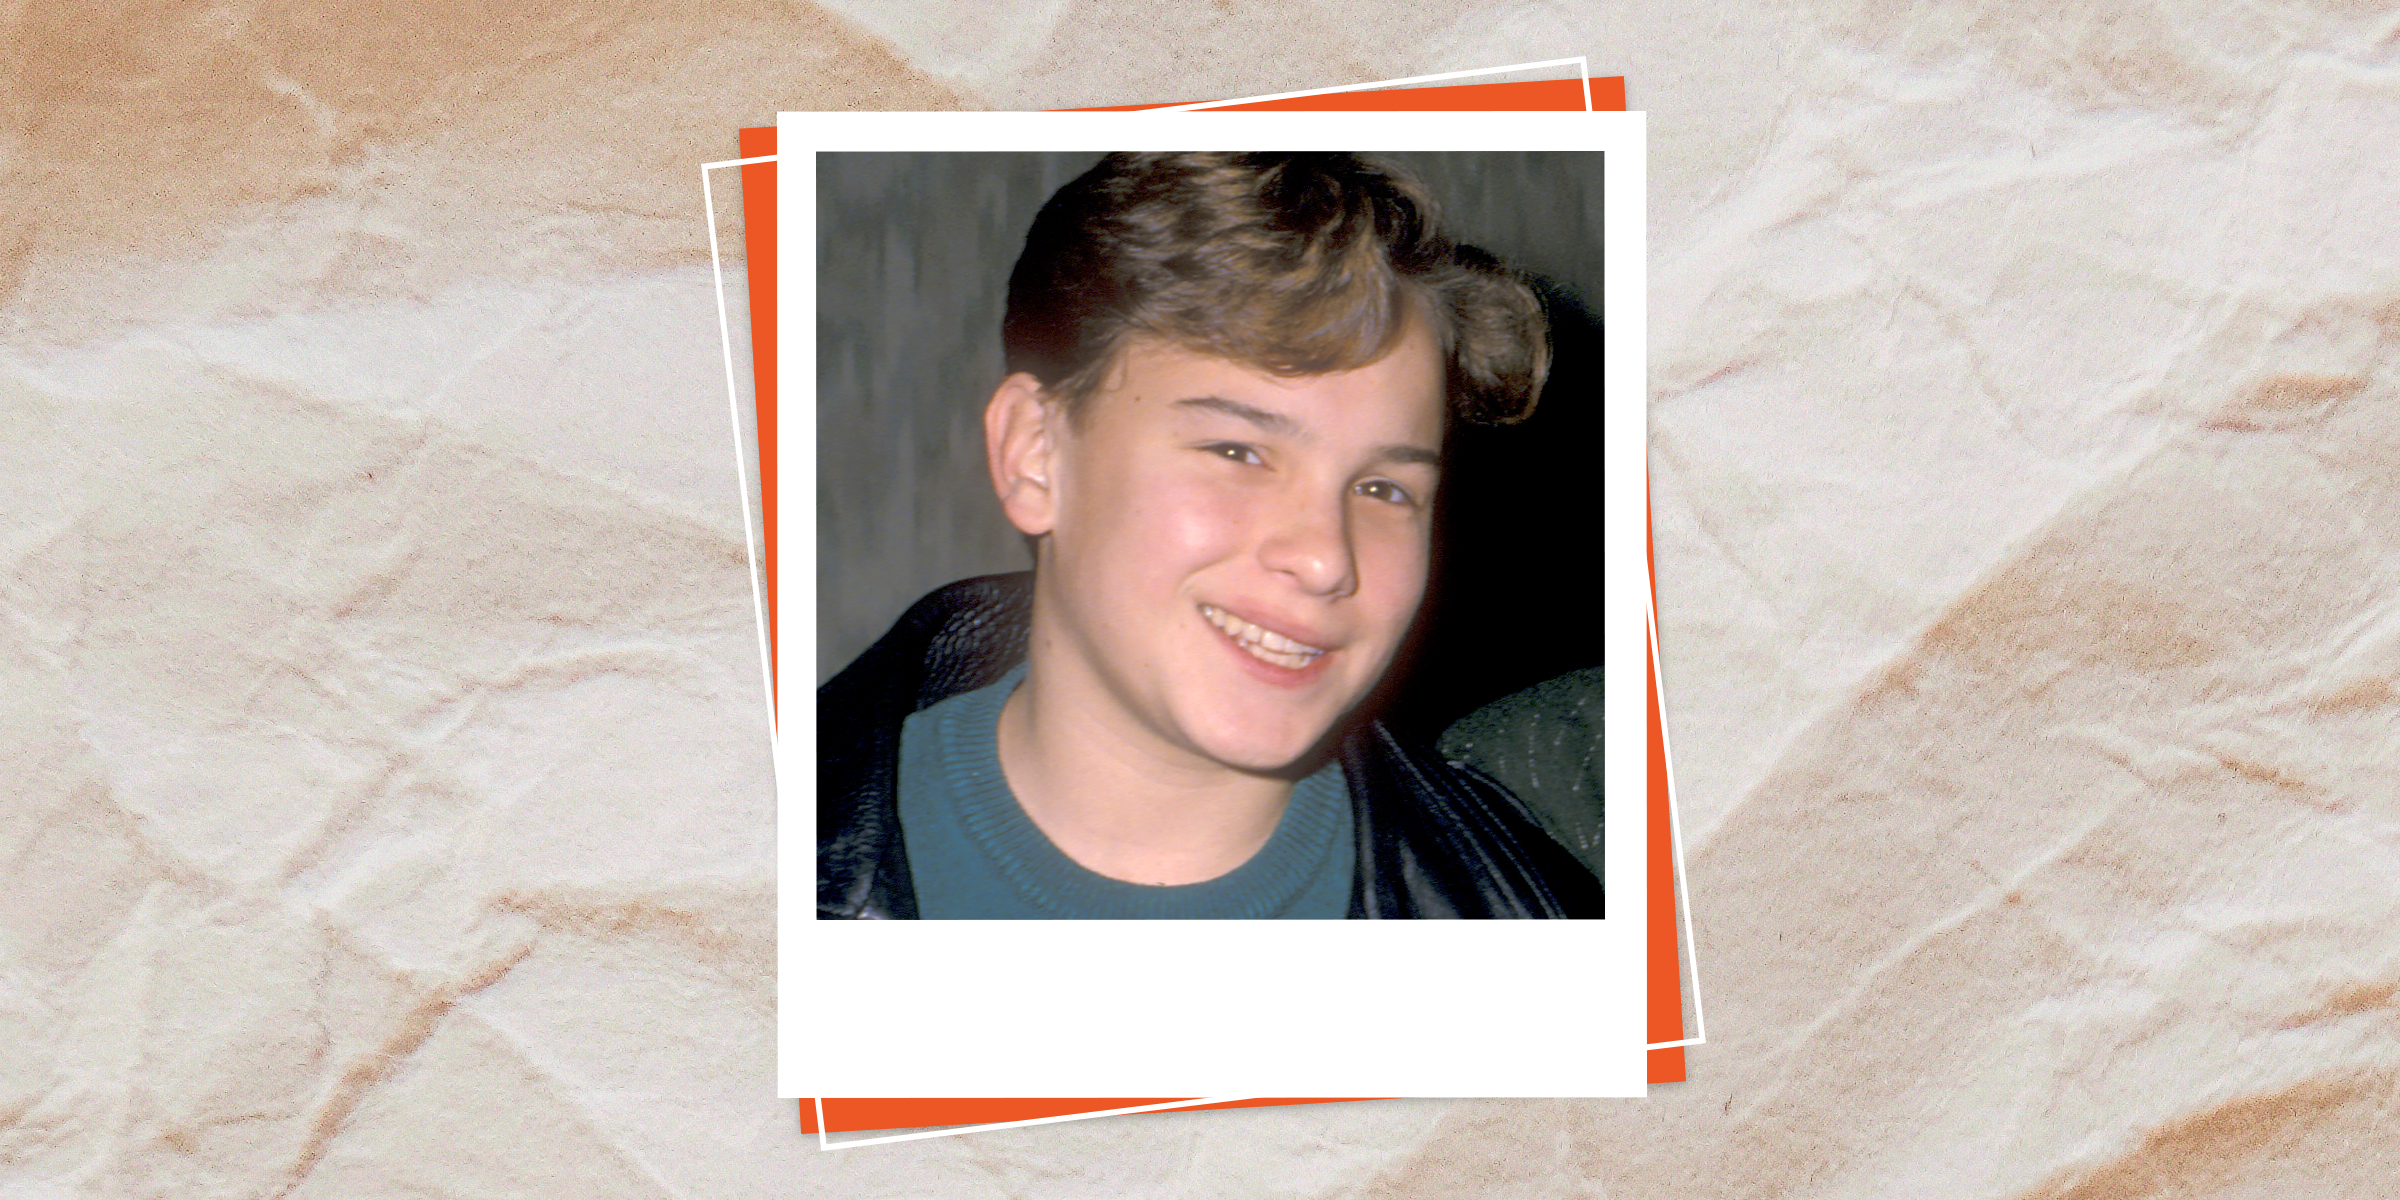 The actor as a young boy | Source: Getty Images